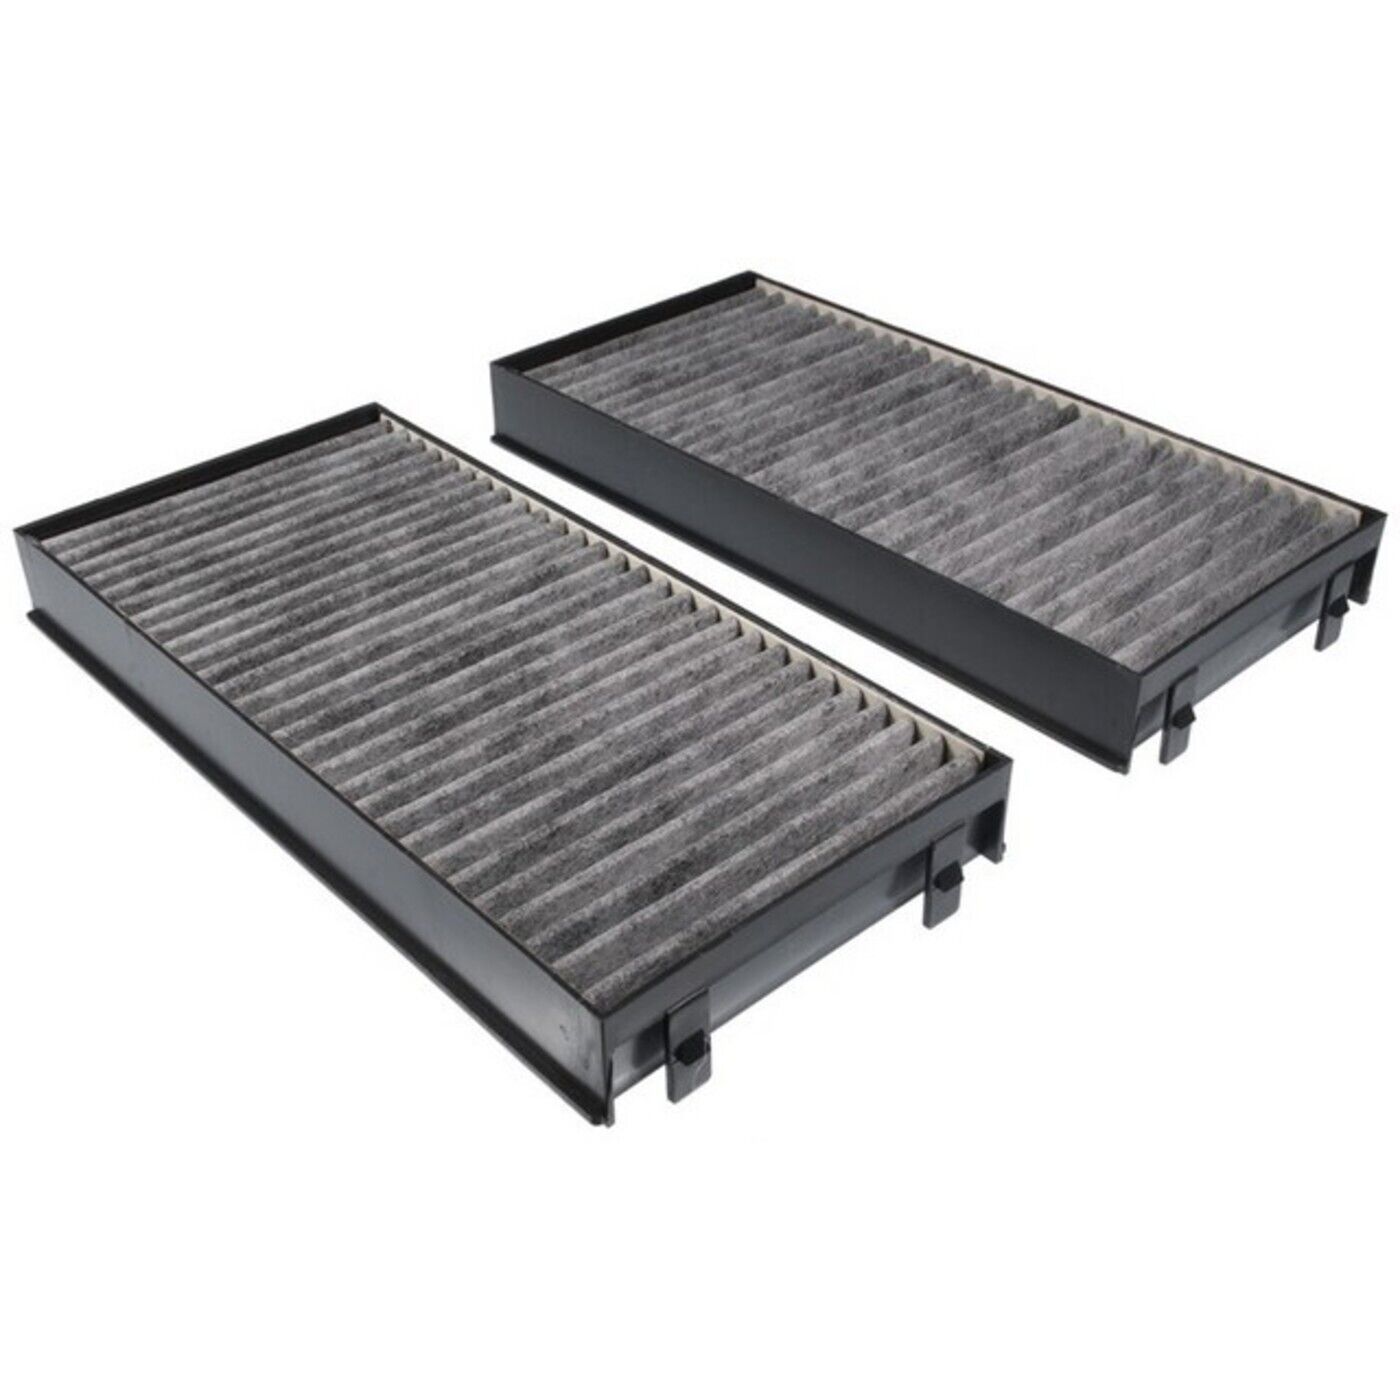 Mahle LAK221S Cabin Air Filters Set of 2 for E70 X5 Series BMW E71 X6 07-18 Pair